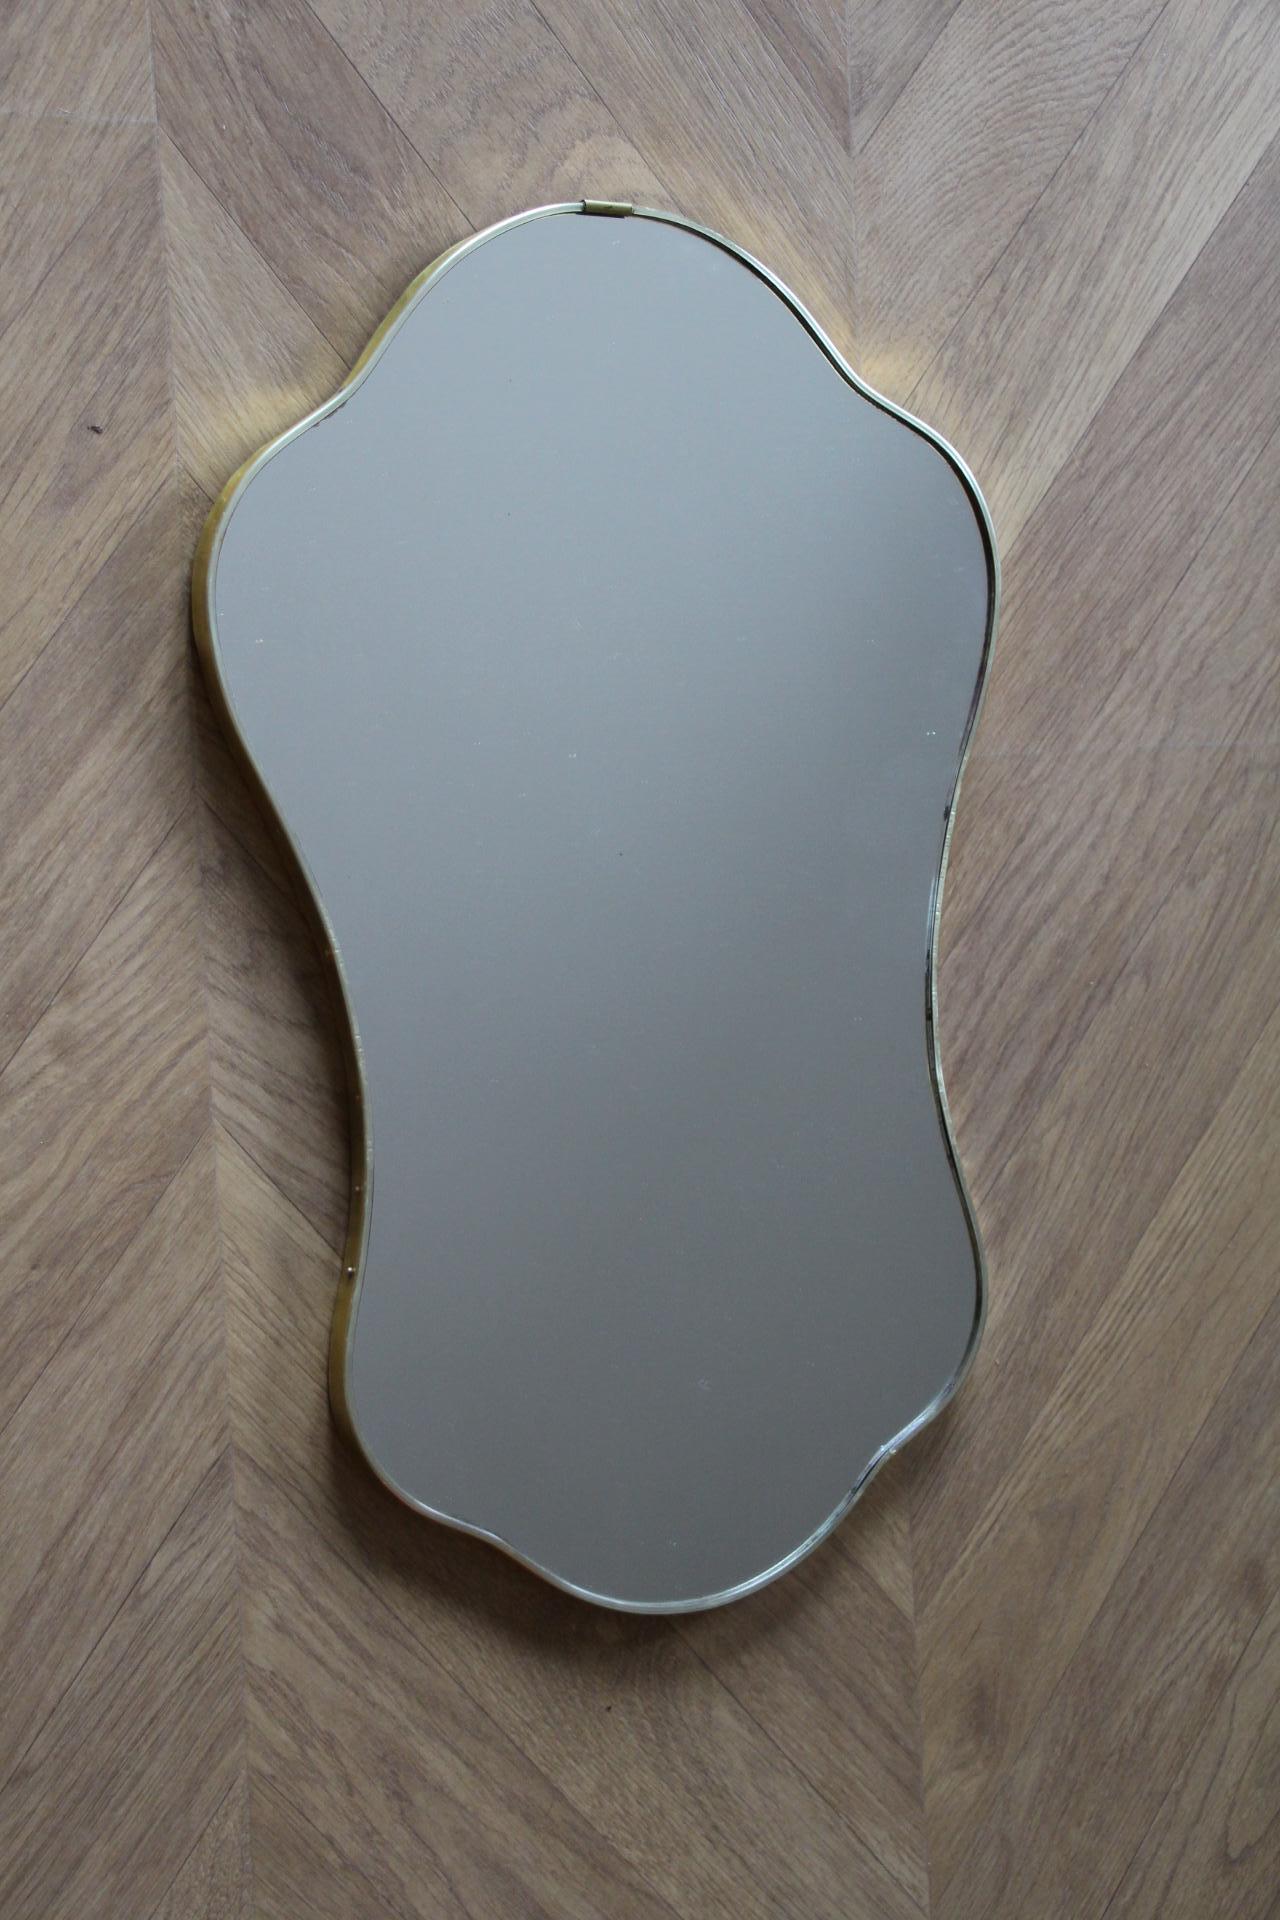 This piece is an elegant Italian wall hung brass mirror with a tapered silhouette, slim line brass edge and soft radial corners. It has exaggerated curves that give it a lot of character. The curved silhouette is quintessential of Italian 1950s